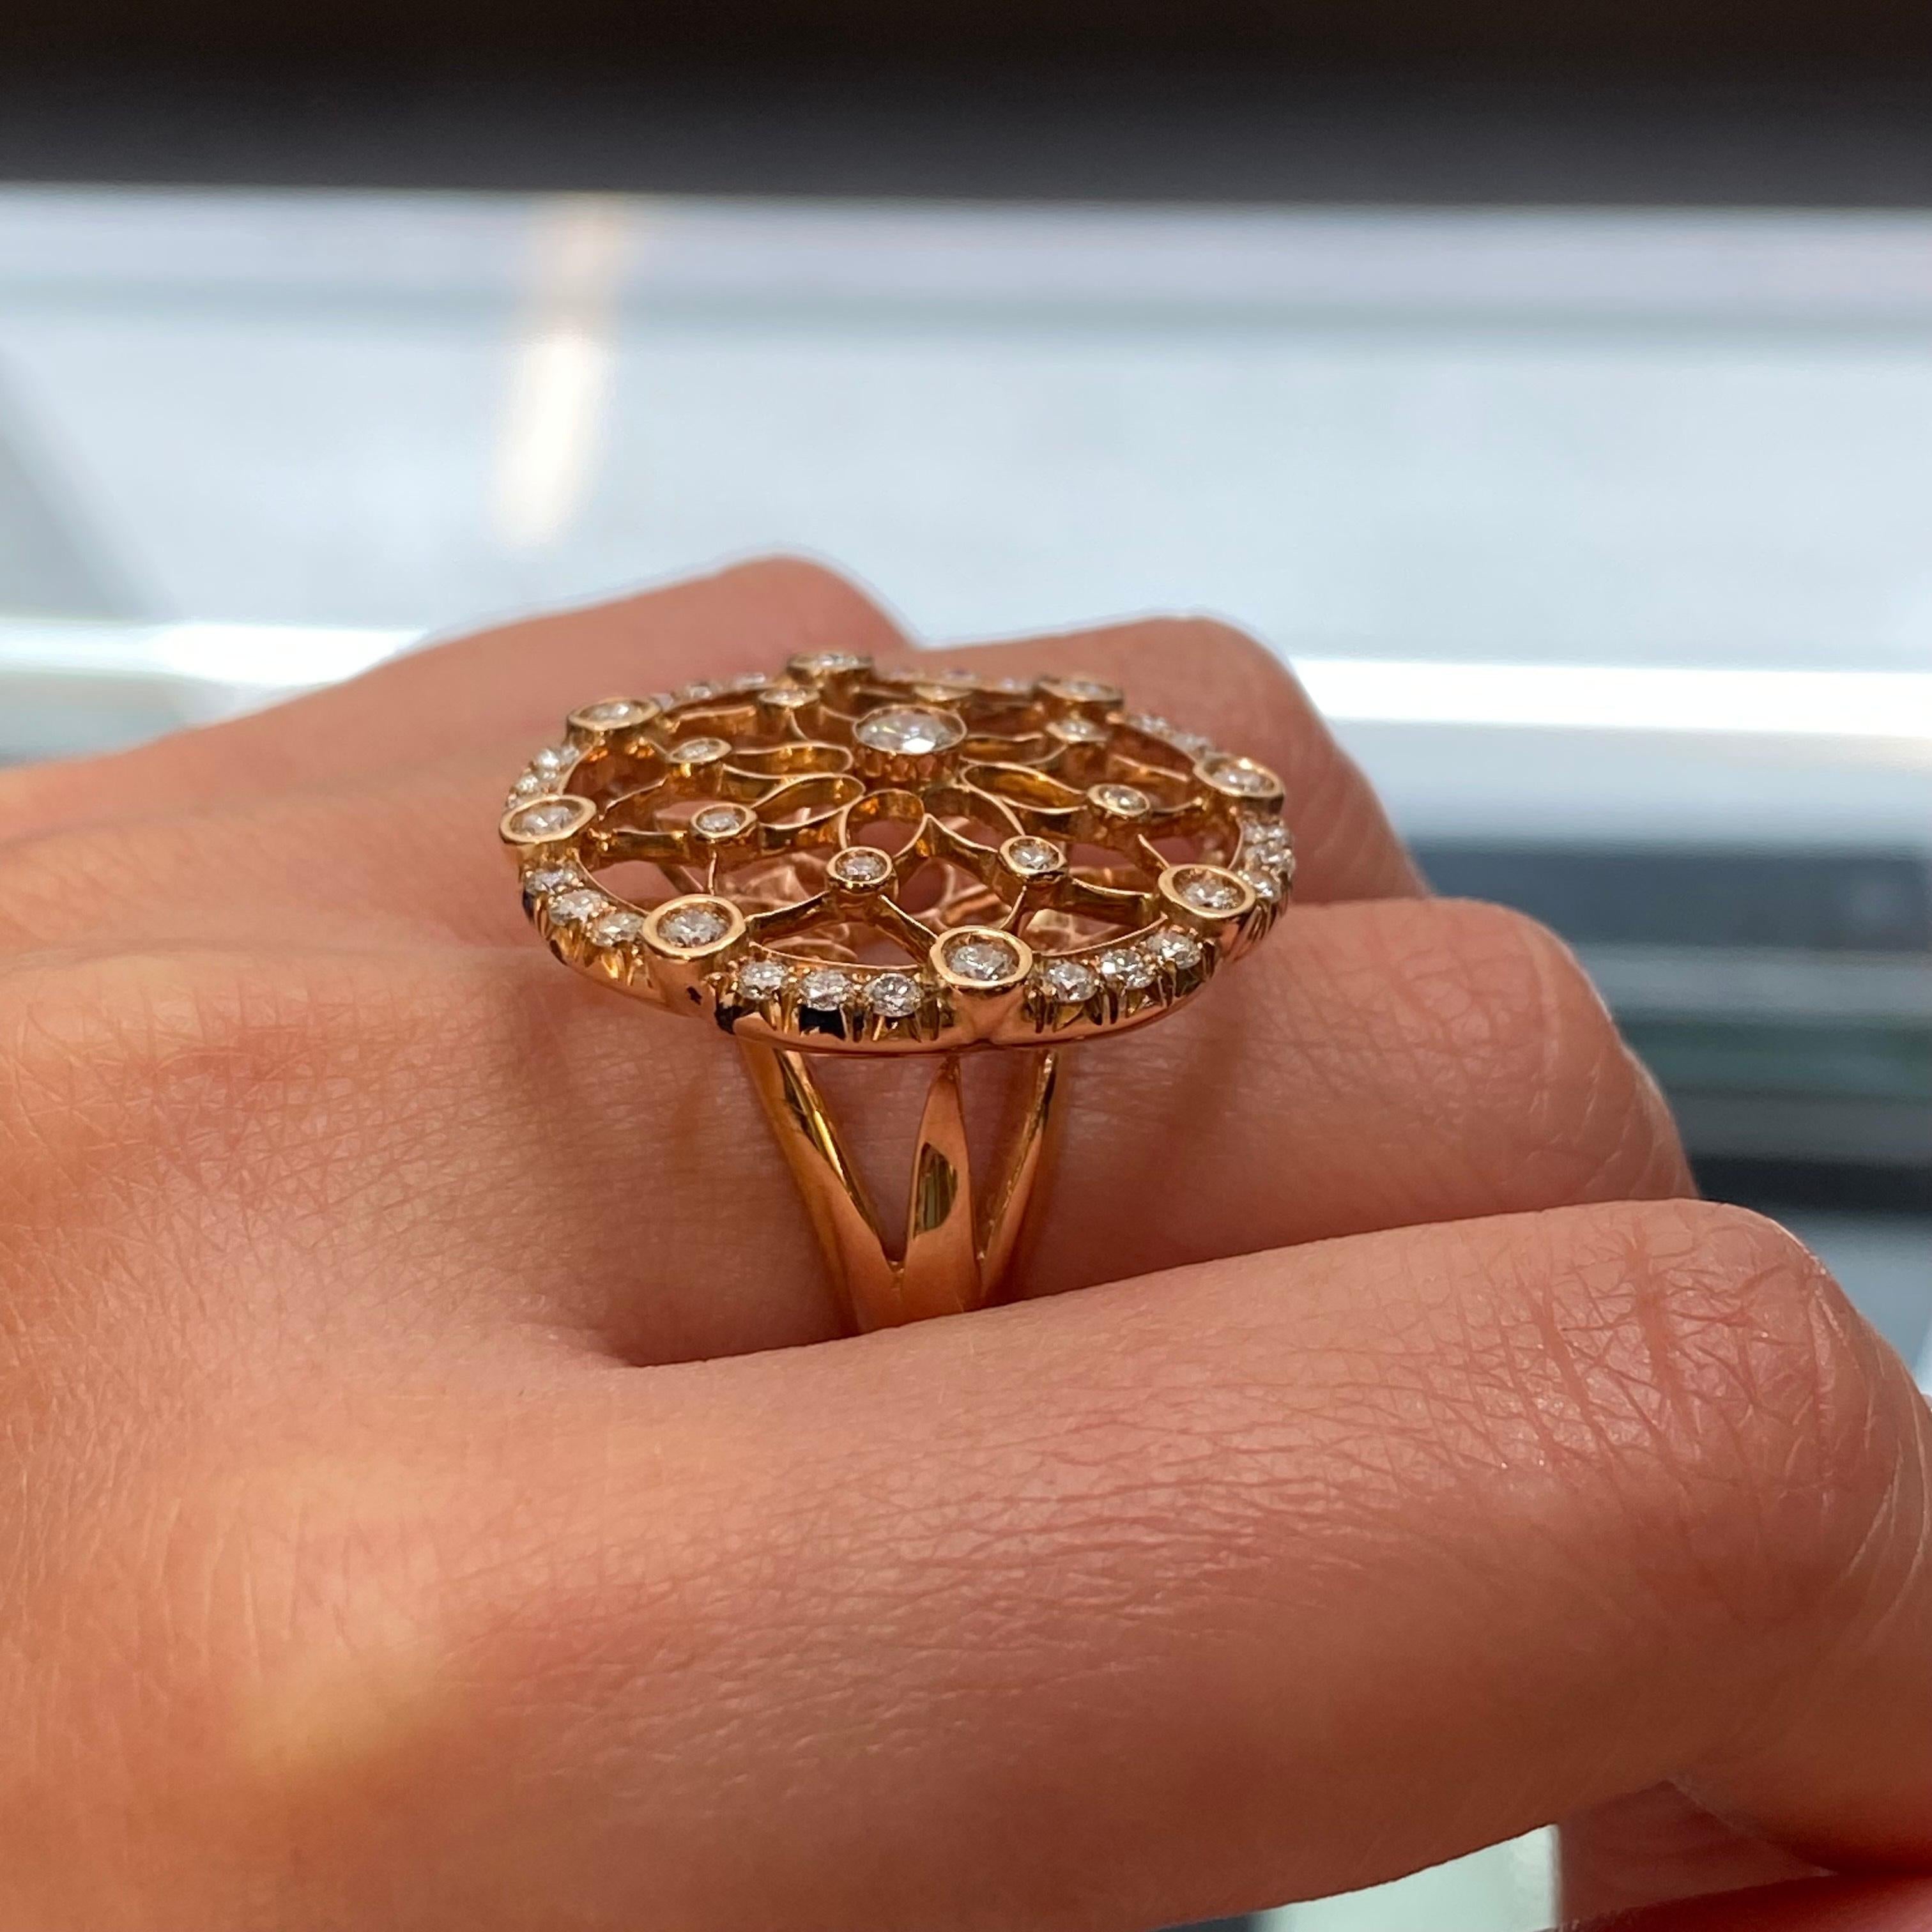 Women's Luca Carati Diamond Large Cocktail Ring 18K Rose Gold 1.21Cttw Size 6.75 For Sale